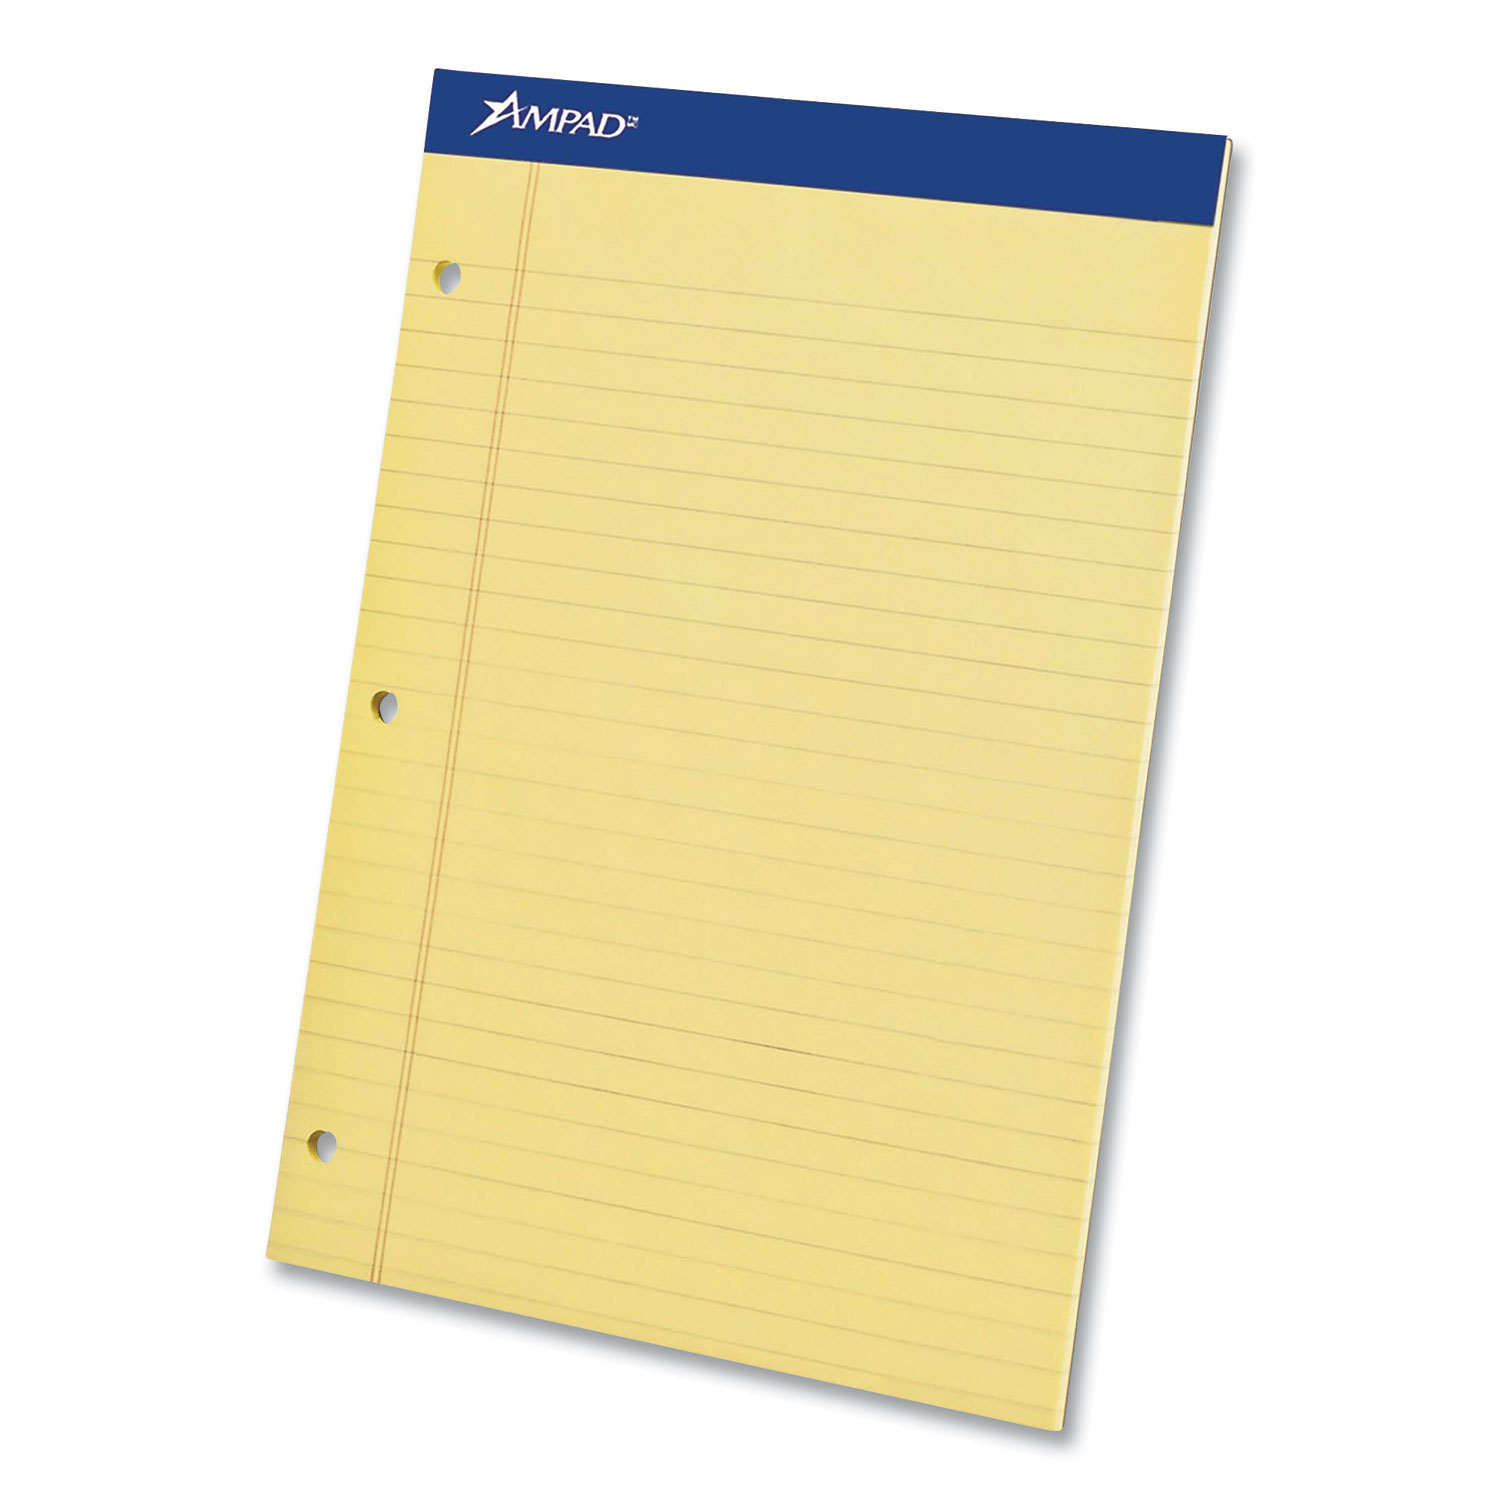  Ampad 20-221 Perforated Writing Pads, 3-Hole Side Punched, Wide/Legal Rule, 8.5 x 11.75, Canary, 50 Sheets, Dozen (AMP353680) 